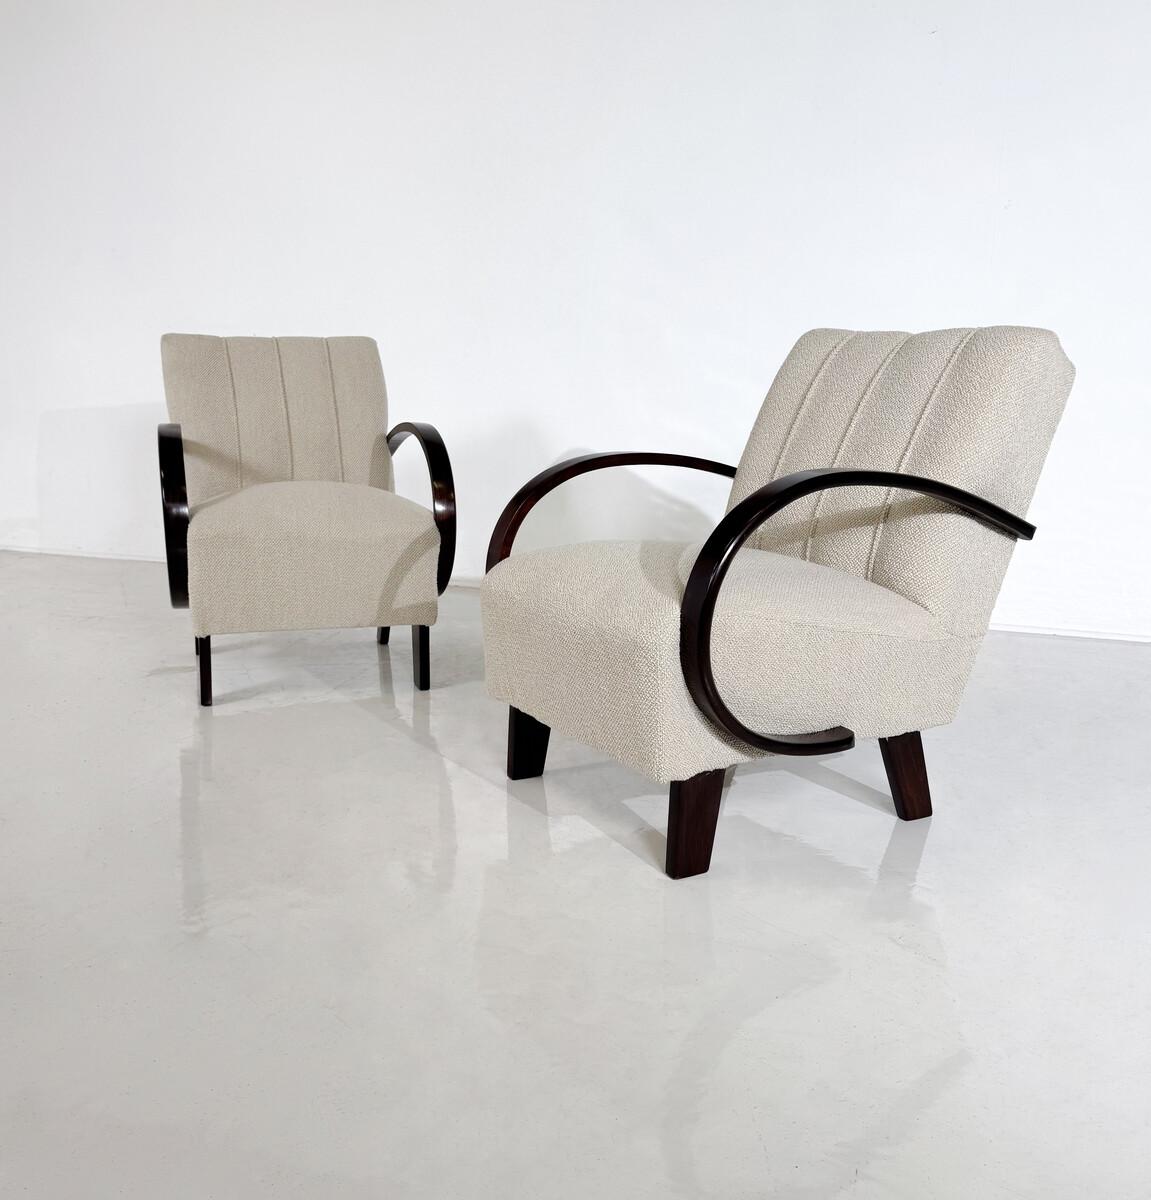 Pair of Bentwood Armchairs by Jindrich Halabala - Czech Republic 1940s In Good Condition For Sale In Brussels, BE